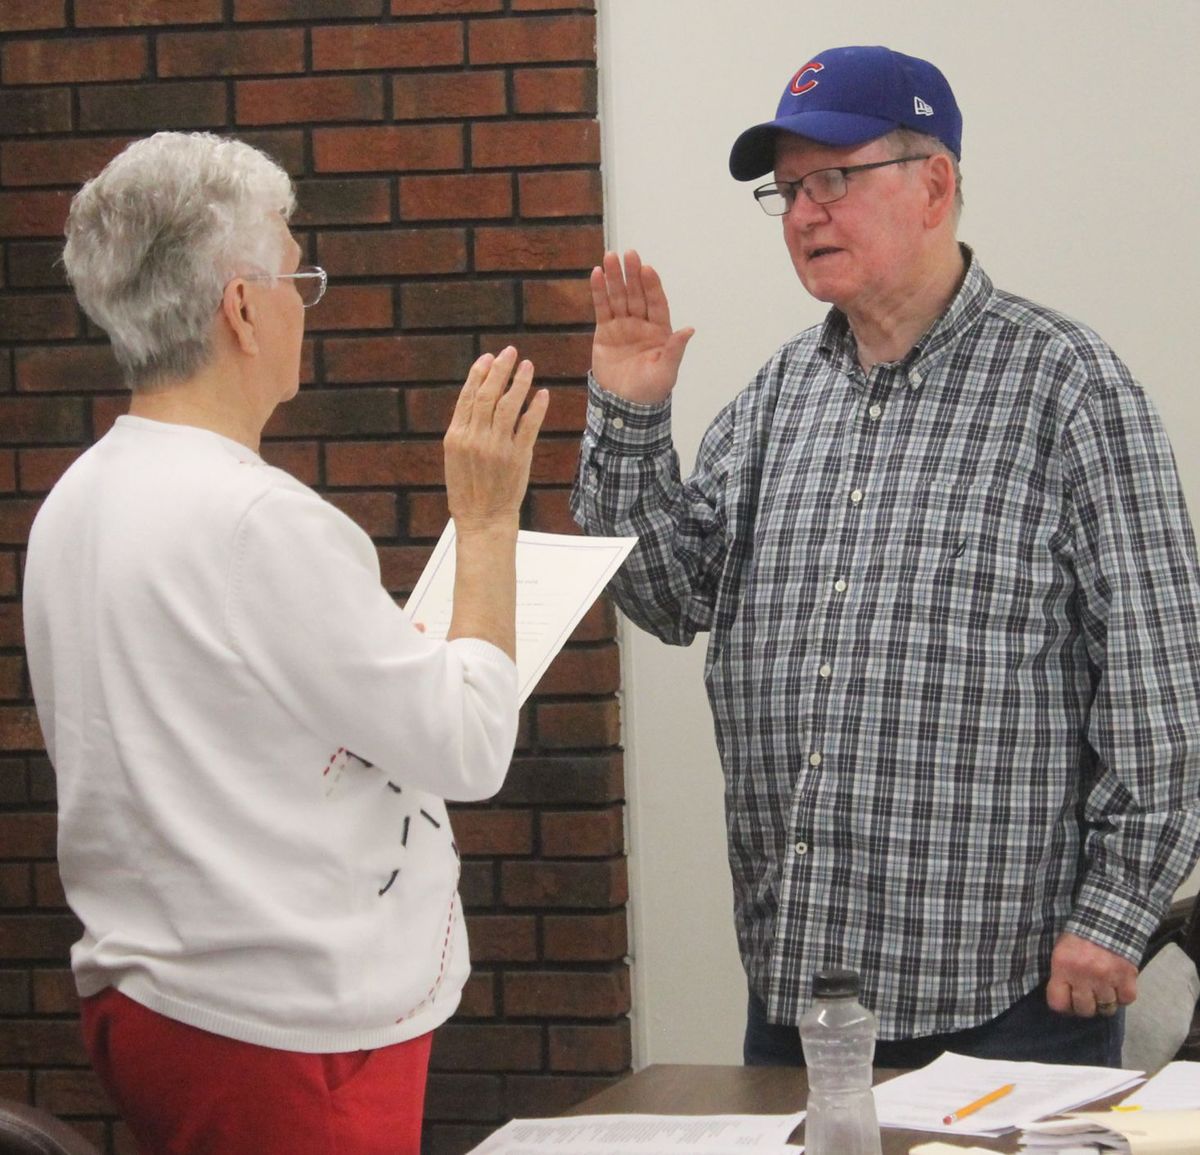 West City Village Board Sworn In at May Meeting - Benton, West Frankfort, Illinois ...1200 x 1155